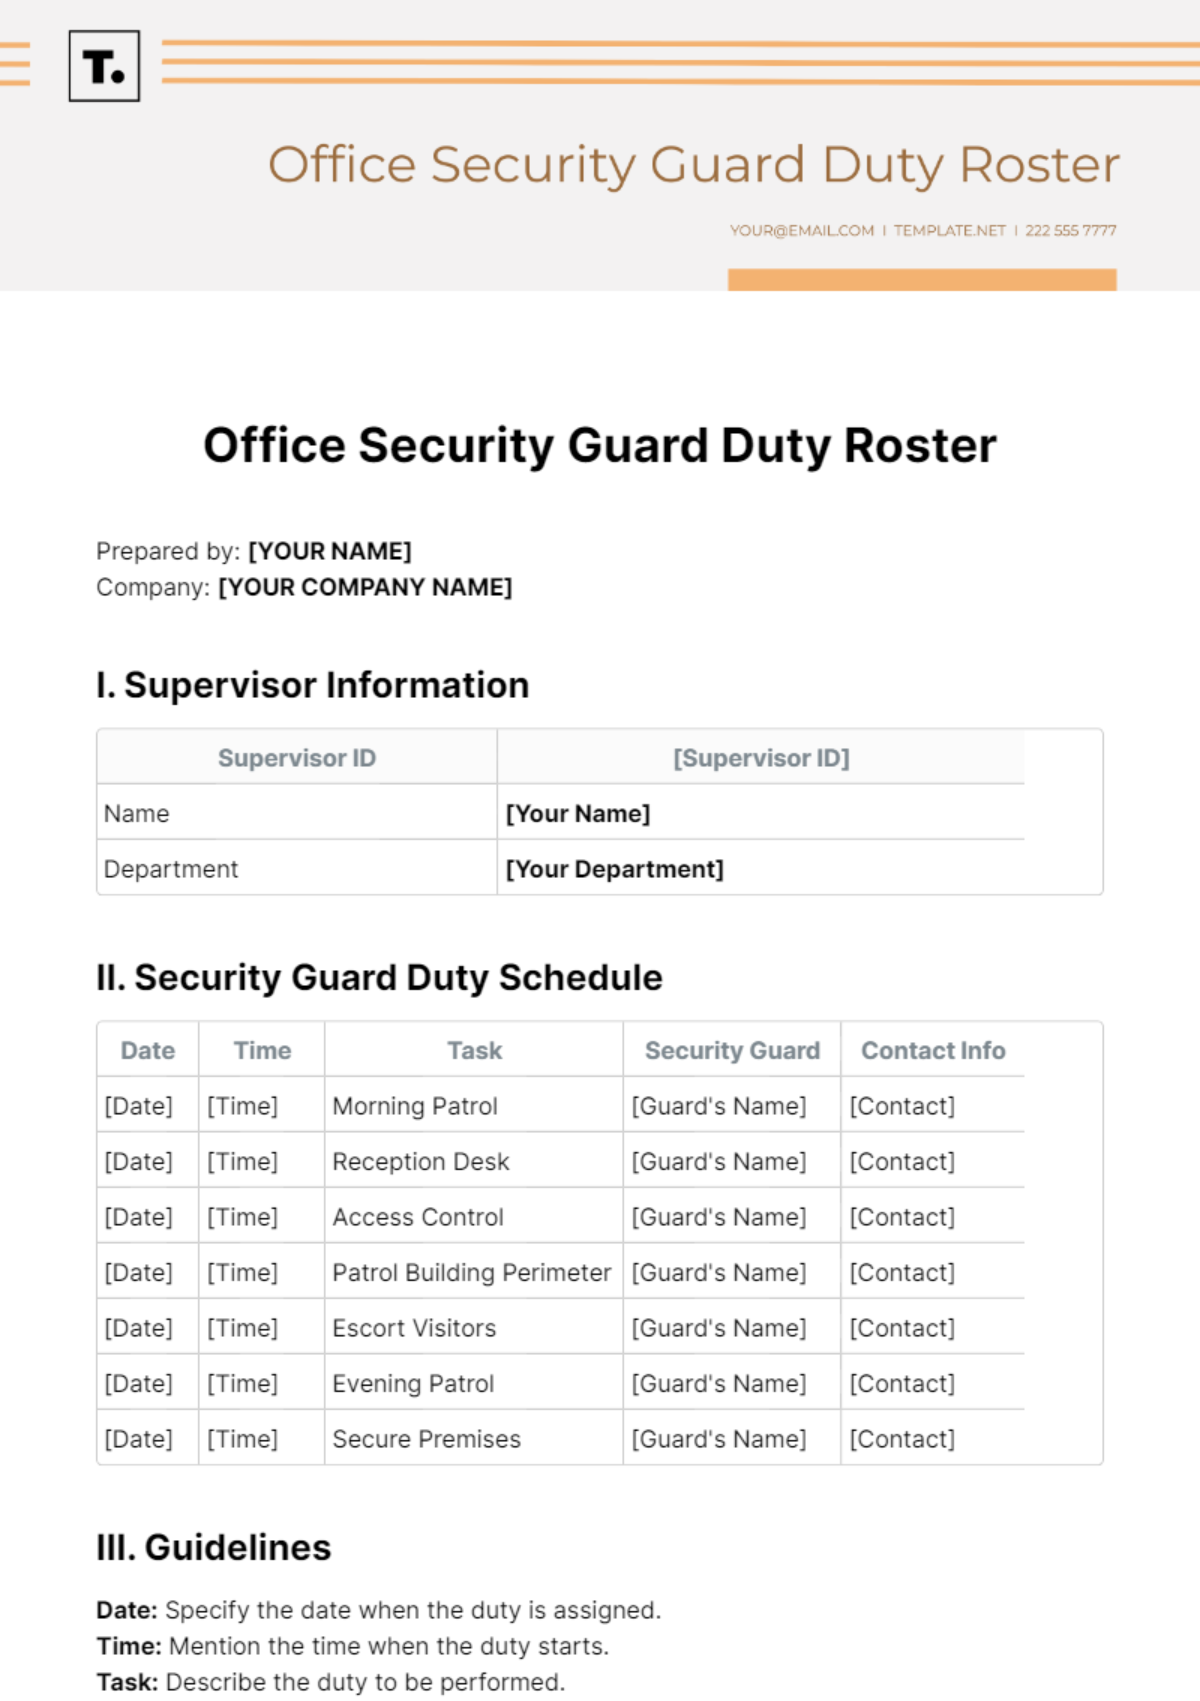 Office Security Guard Duty Roster Template